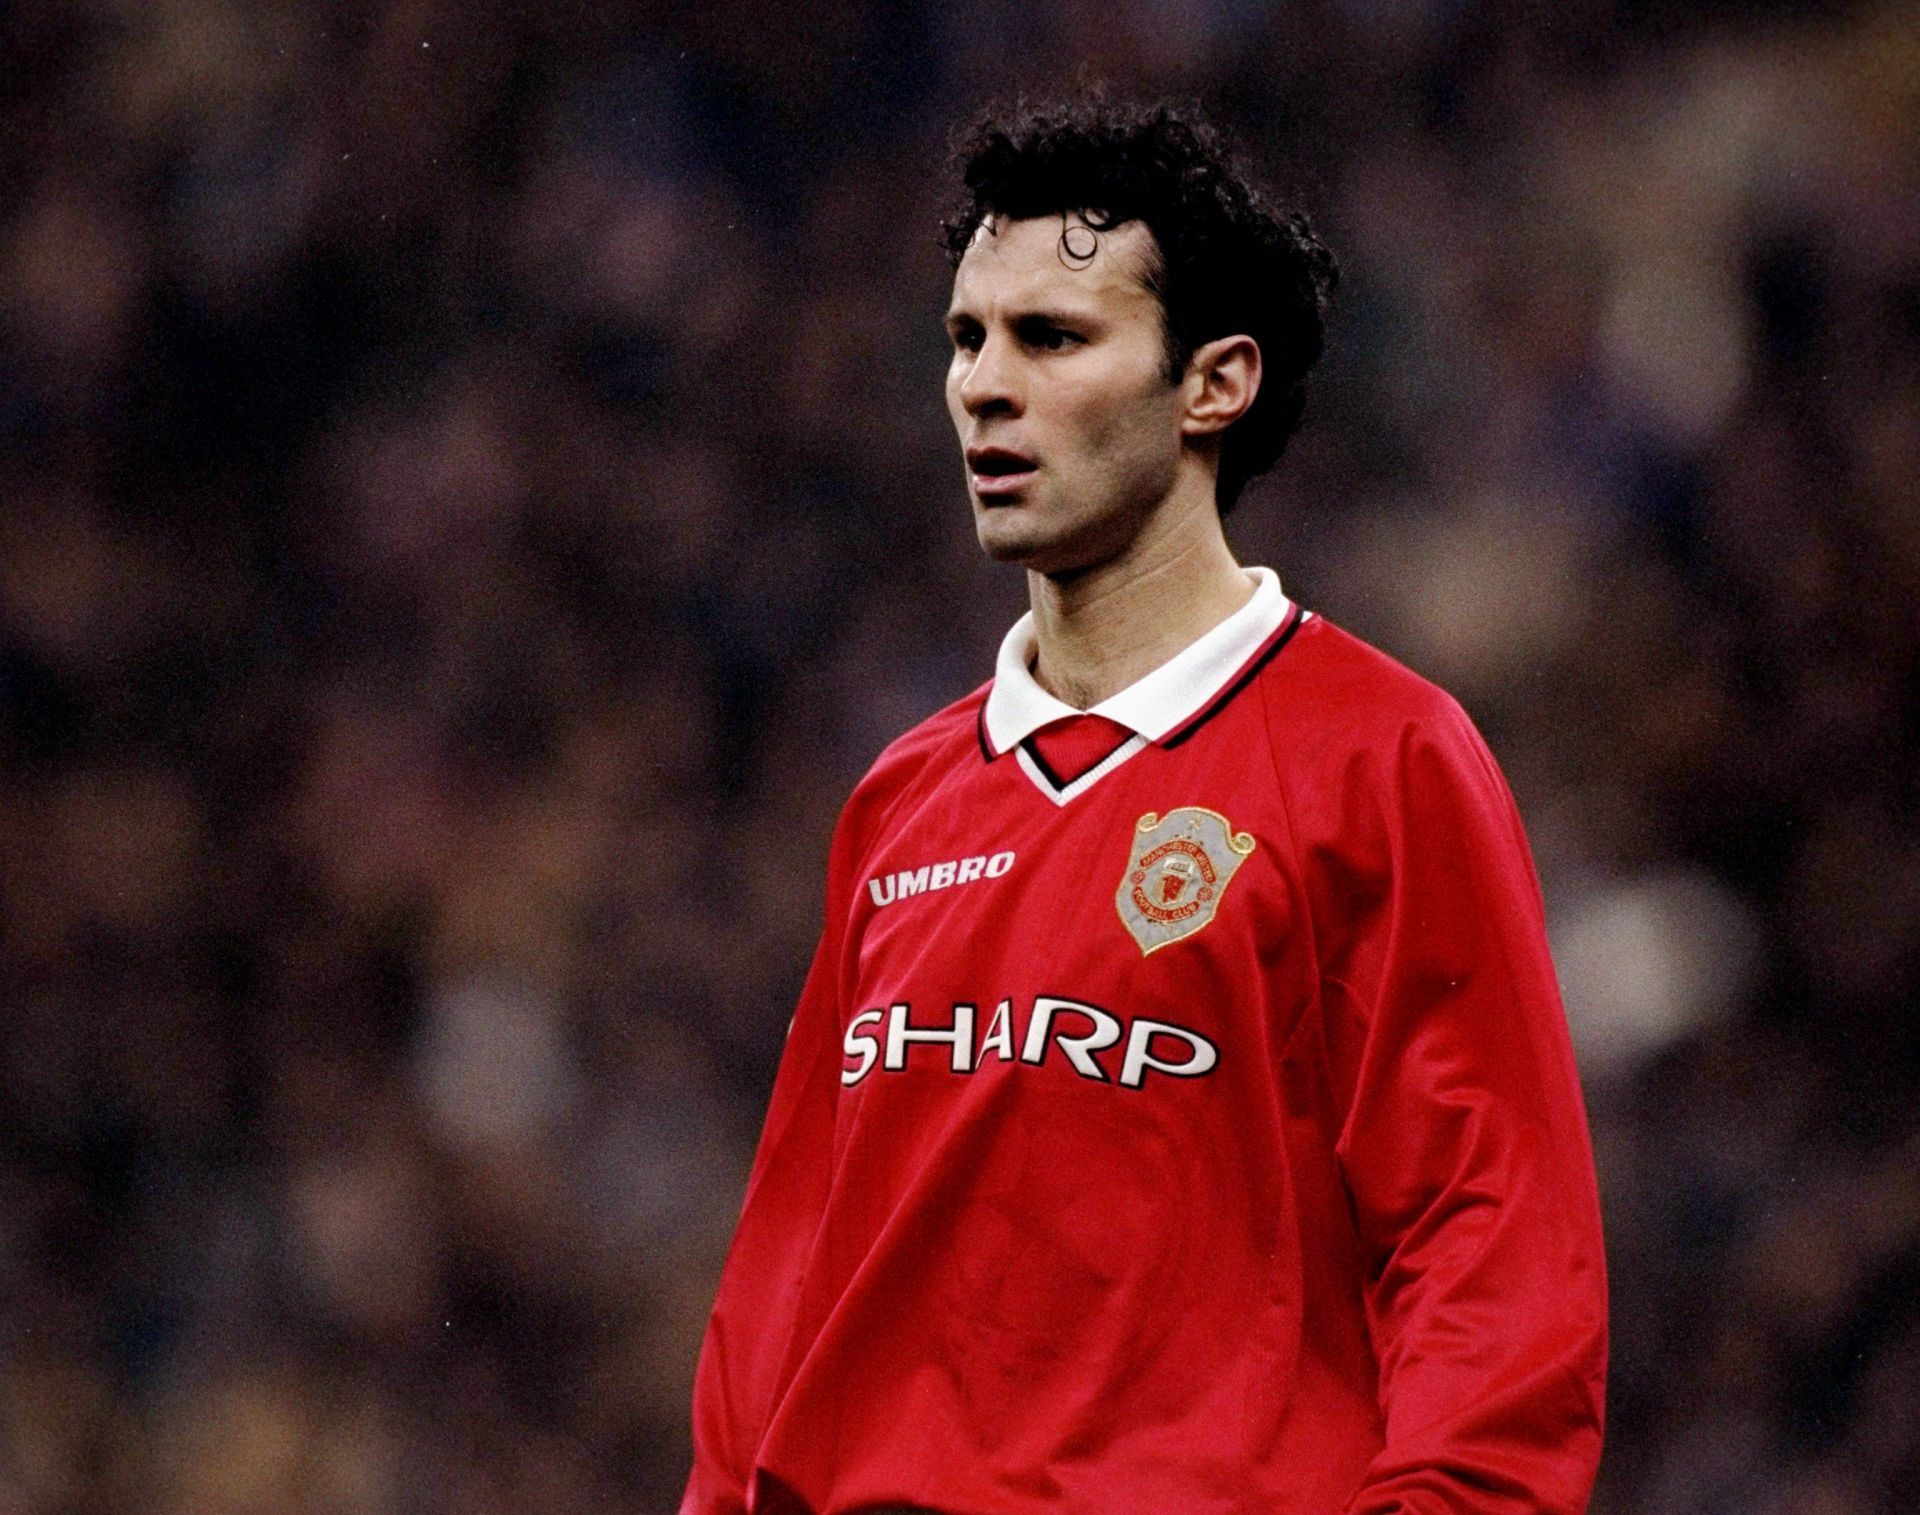 Ryan Giggs is one of the oldest scorers in the Premier League.